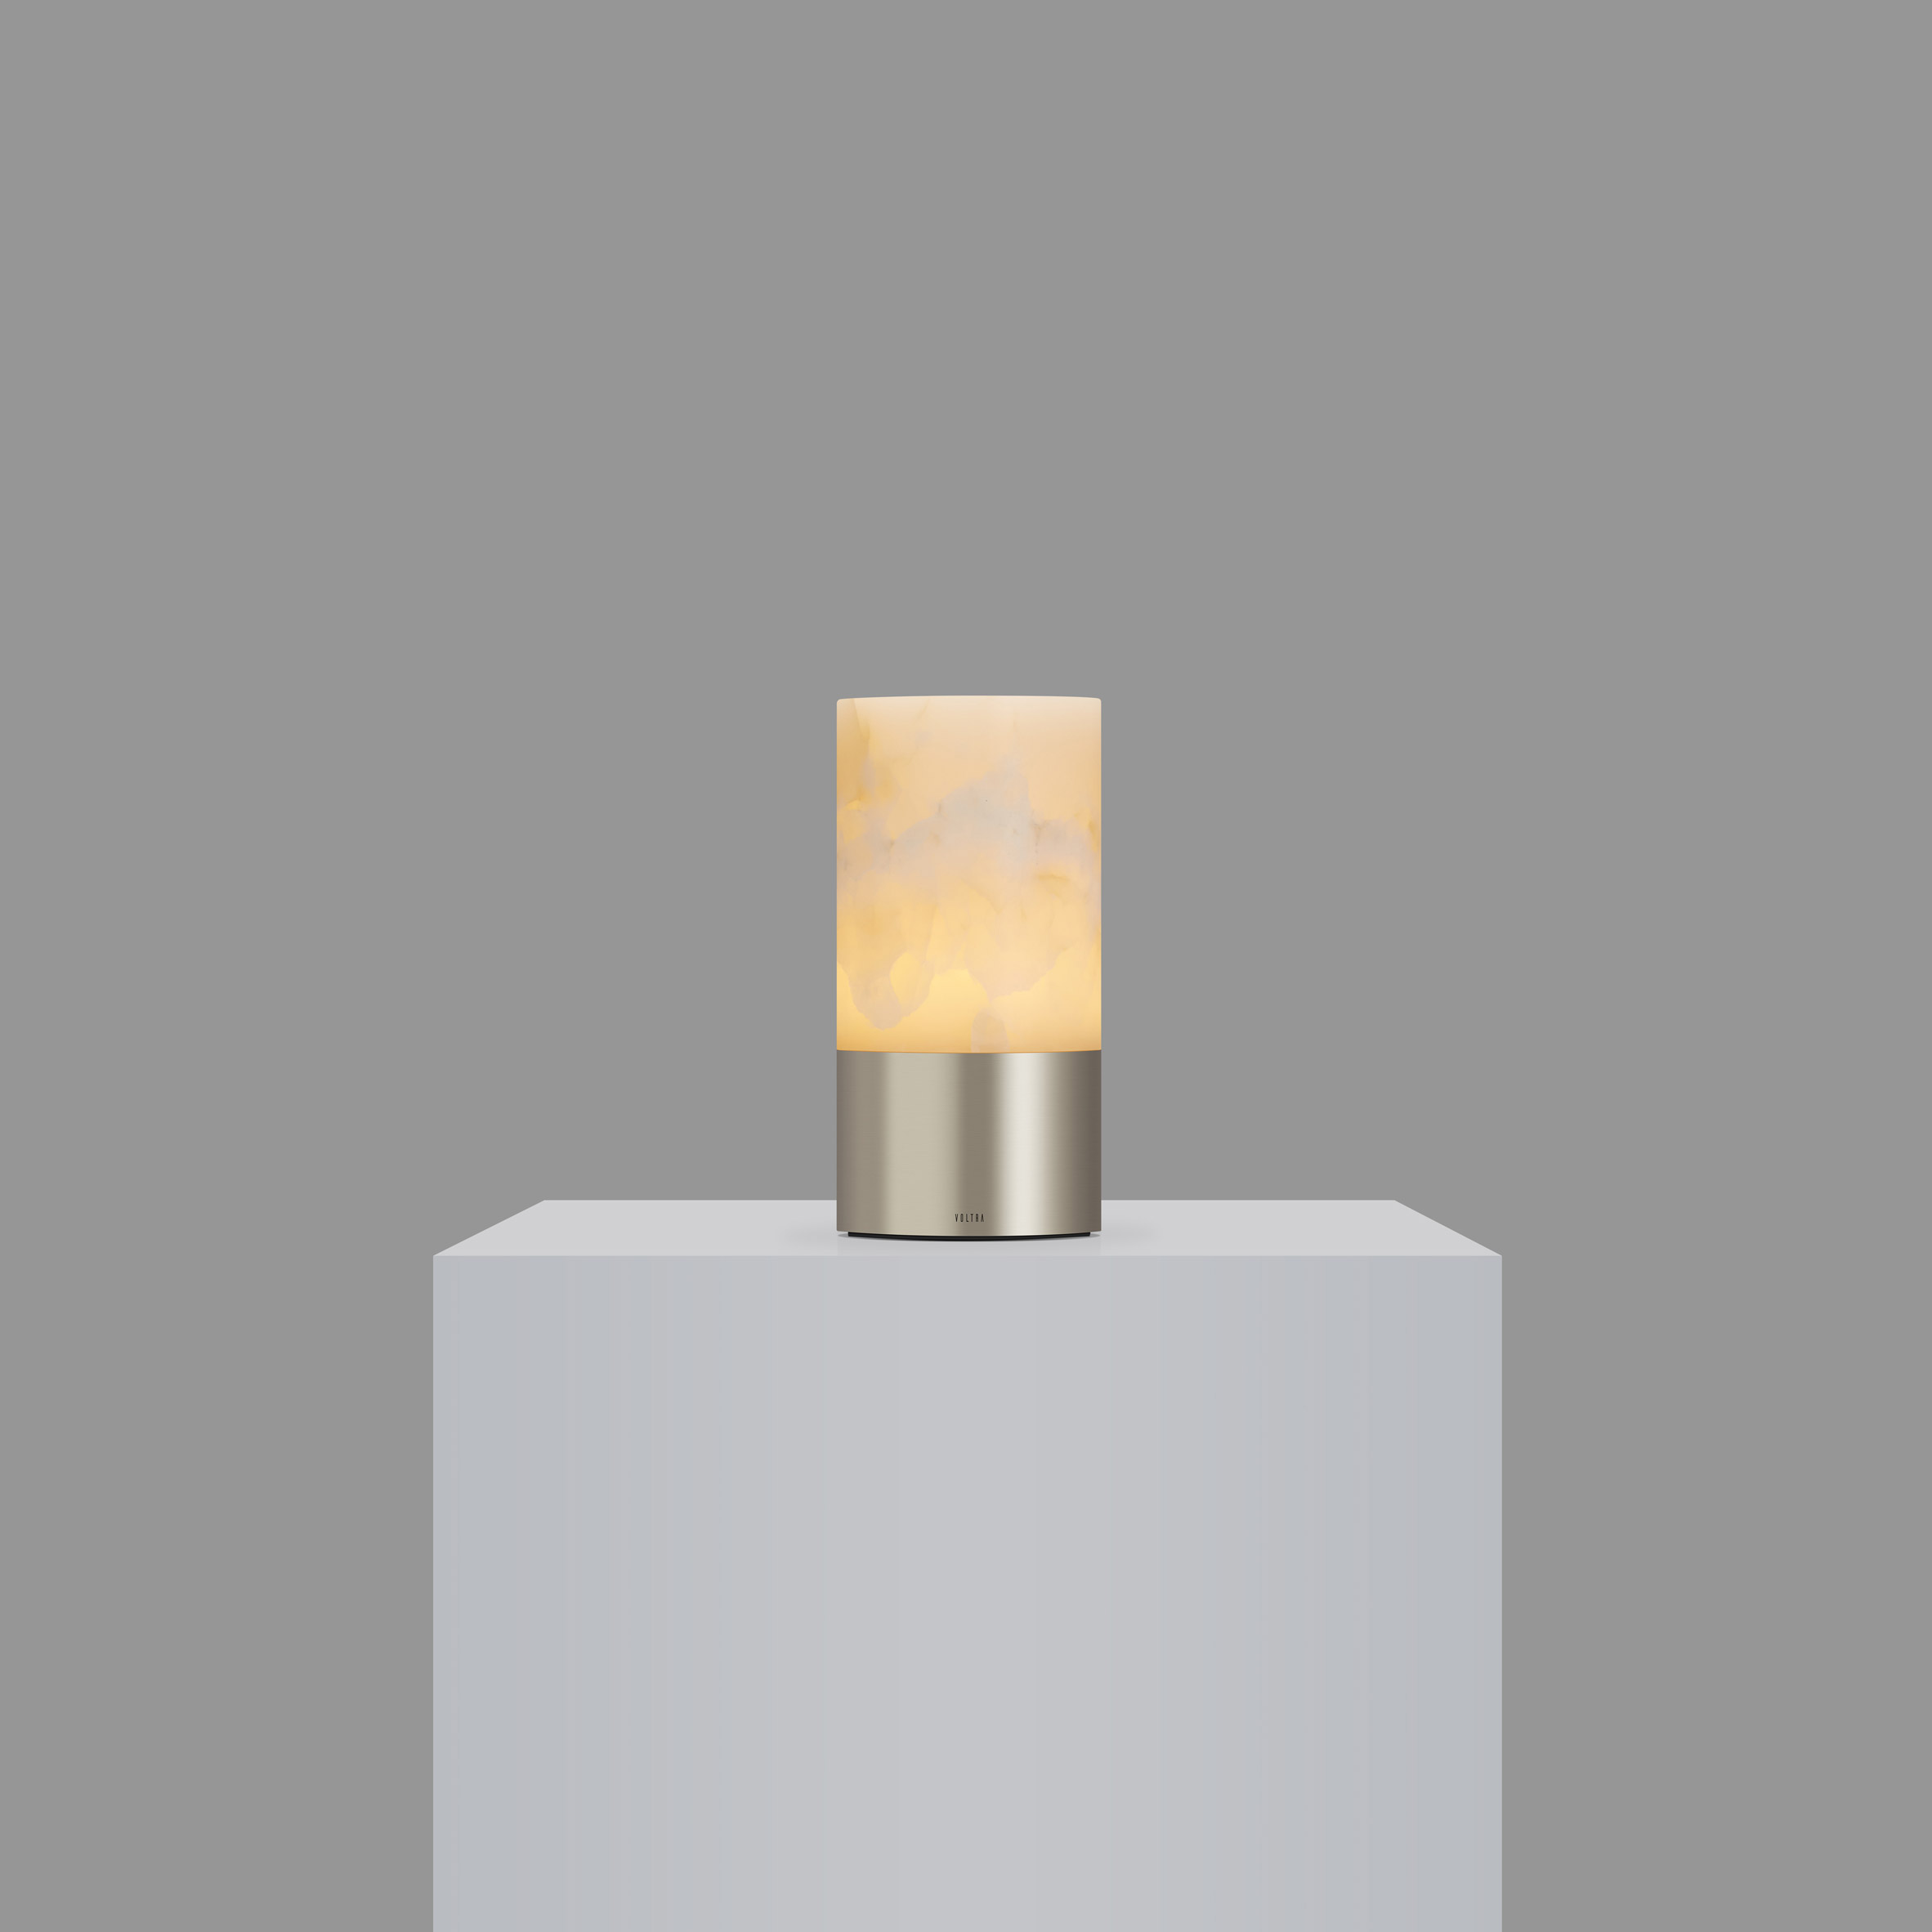 Voltra Alabaster lamps by Arnold Chan for Voltra